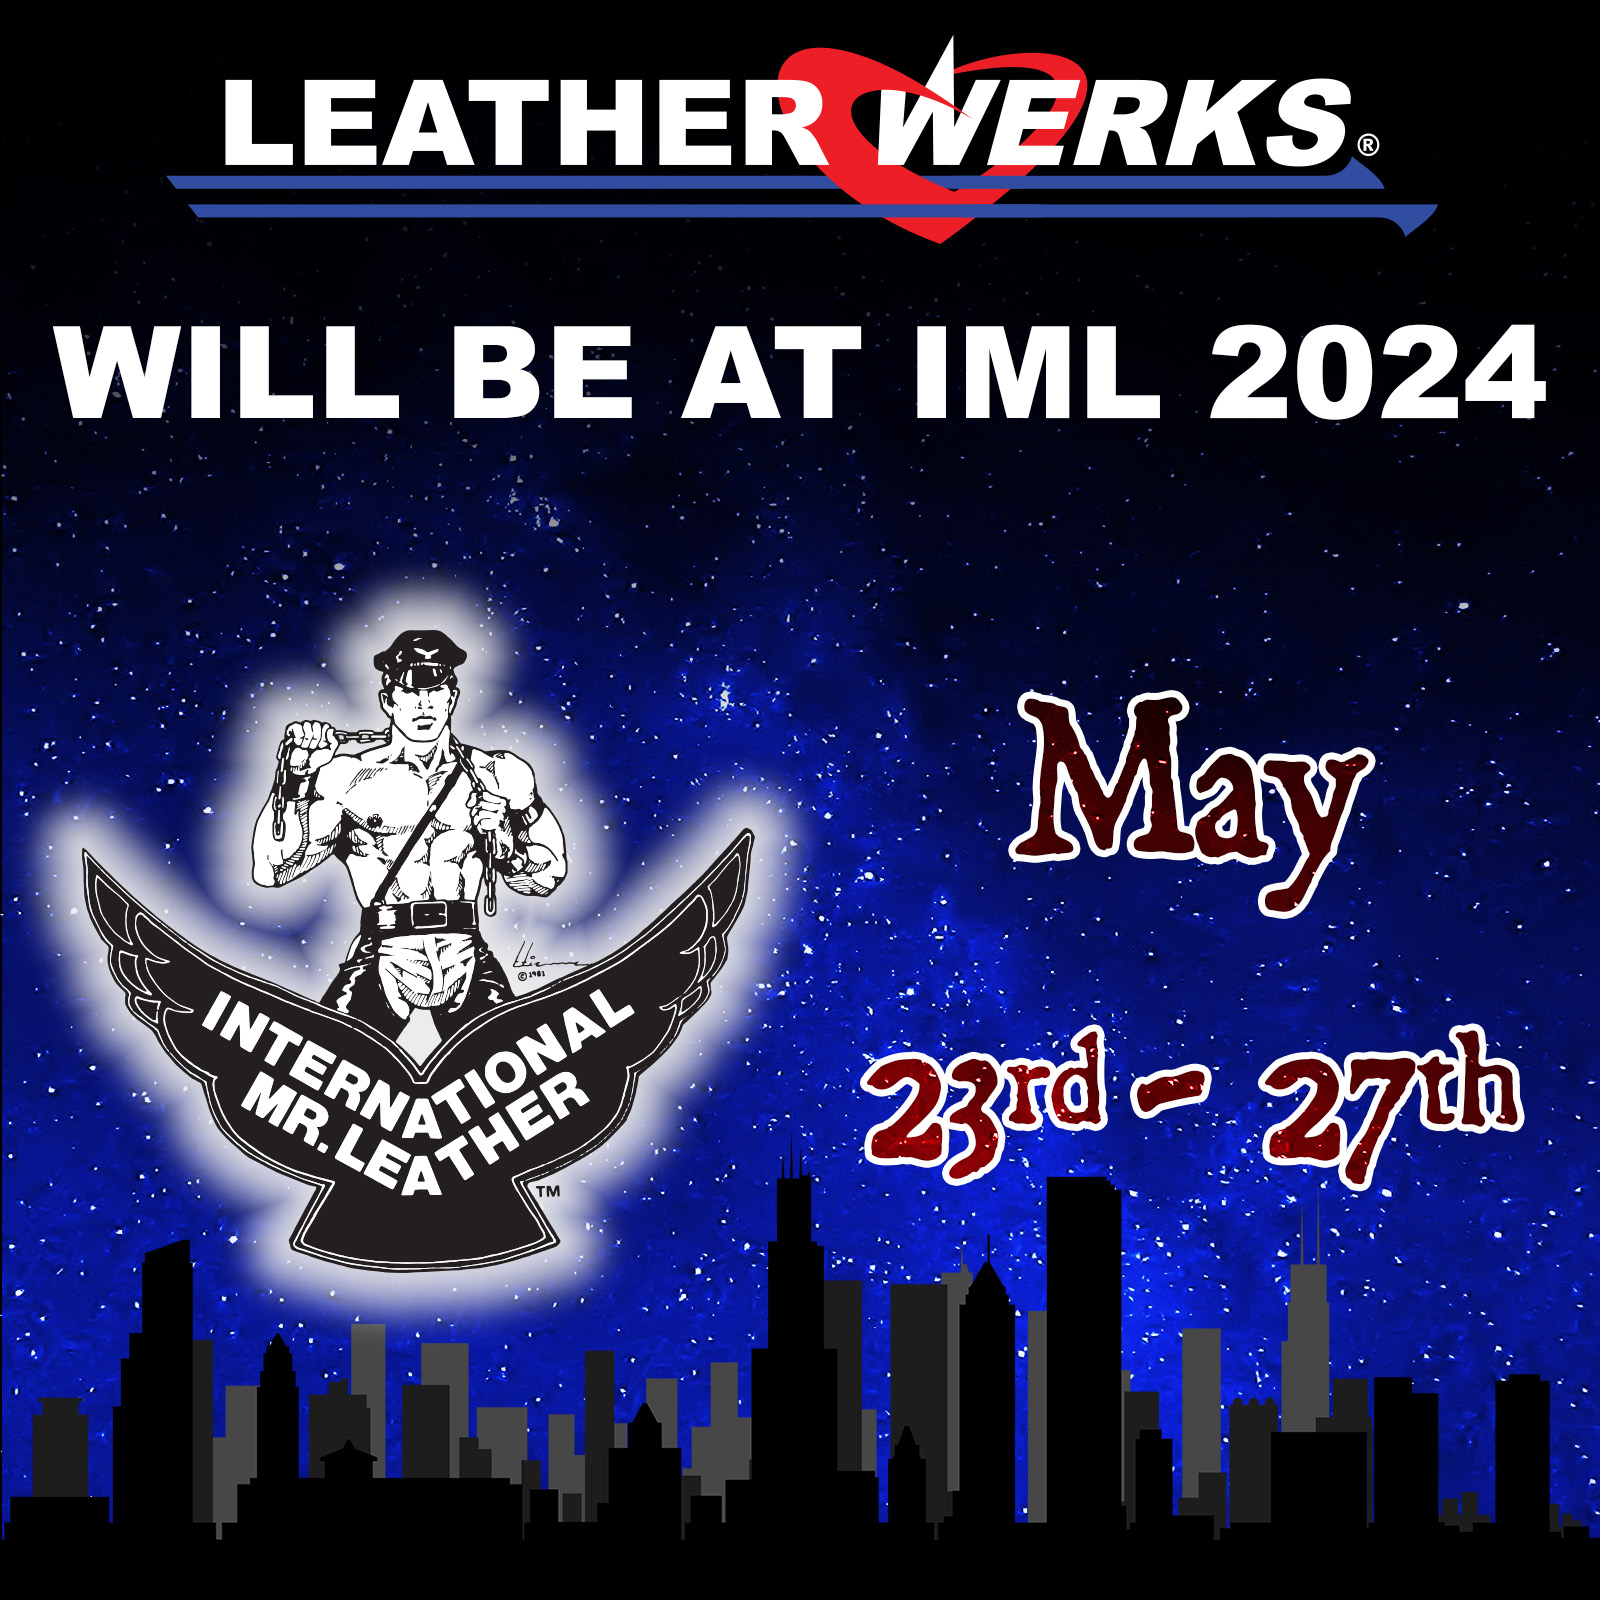 We're going to IML, Come visit us at the vendor market!